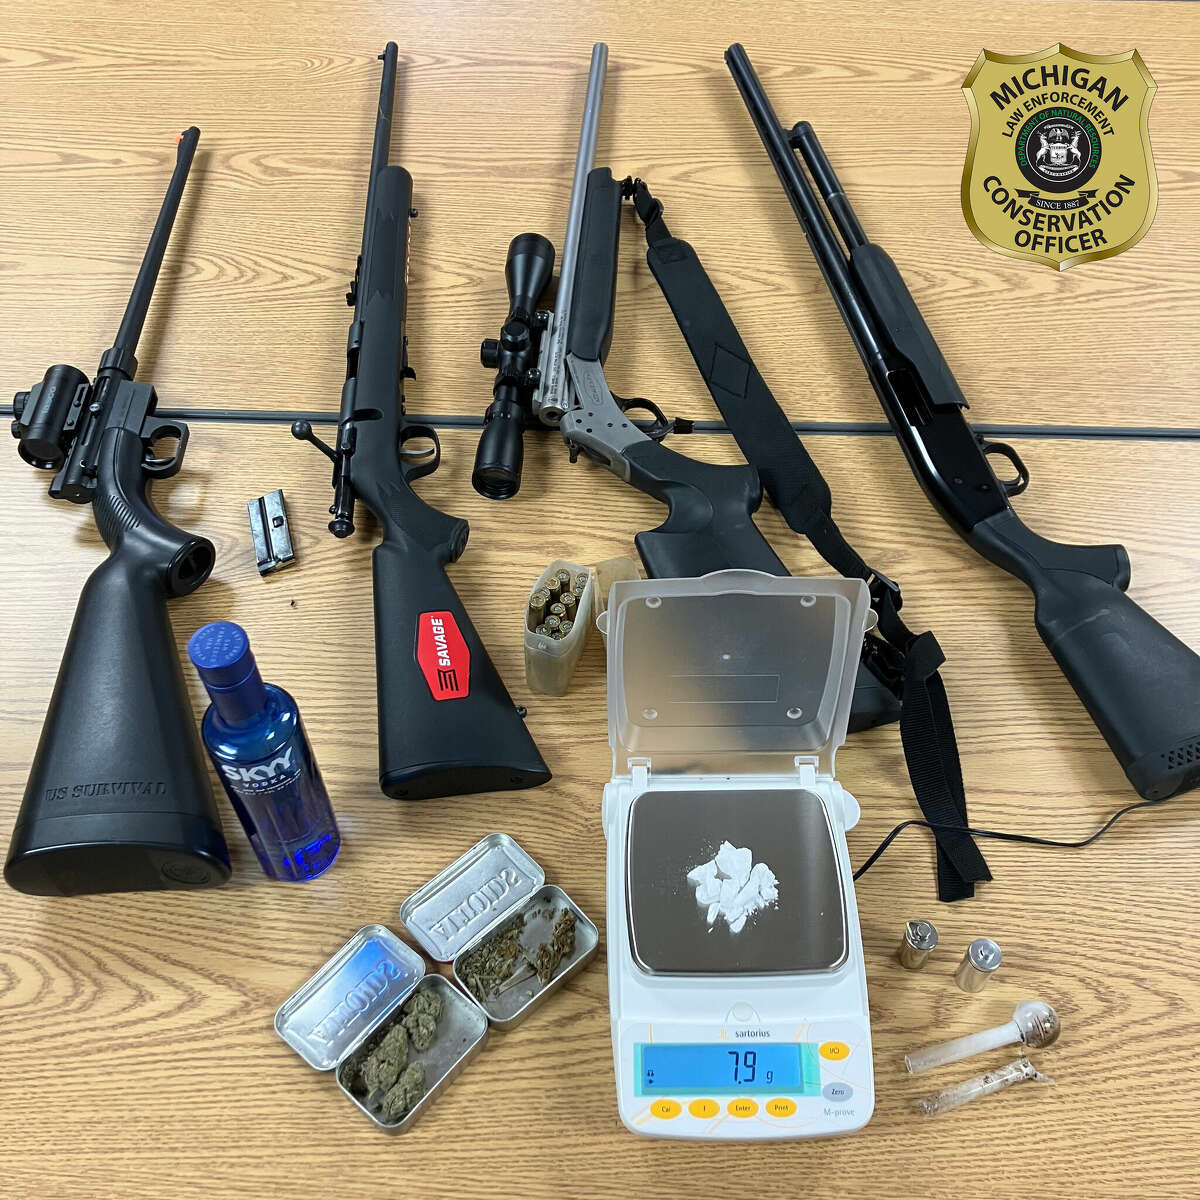 Conservation officers for Michigan DNR arrested two people driving through a northern Michigan state forest for possessing illegal firearms and drugs after conducting a traffic stop.